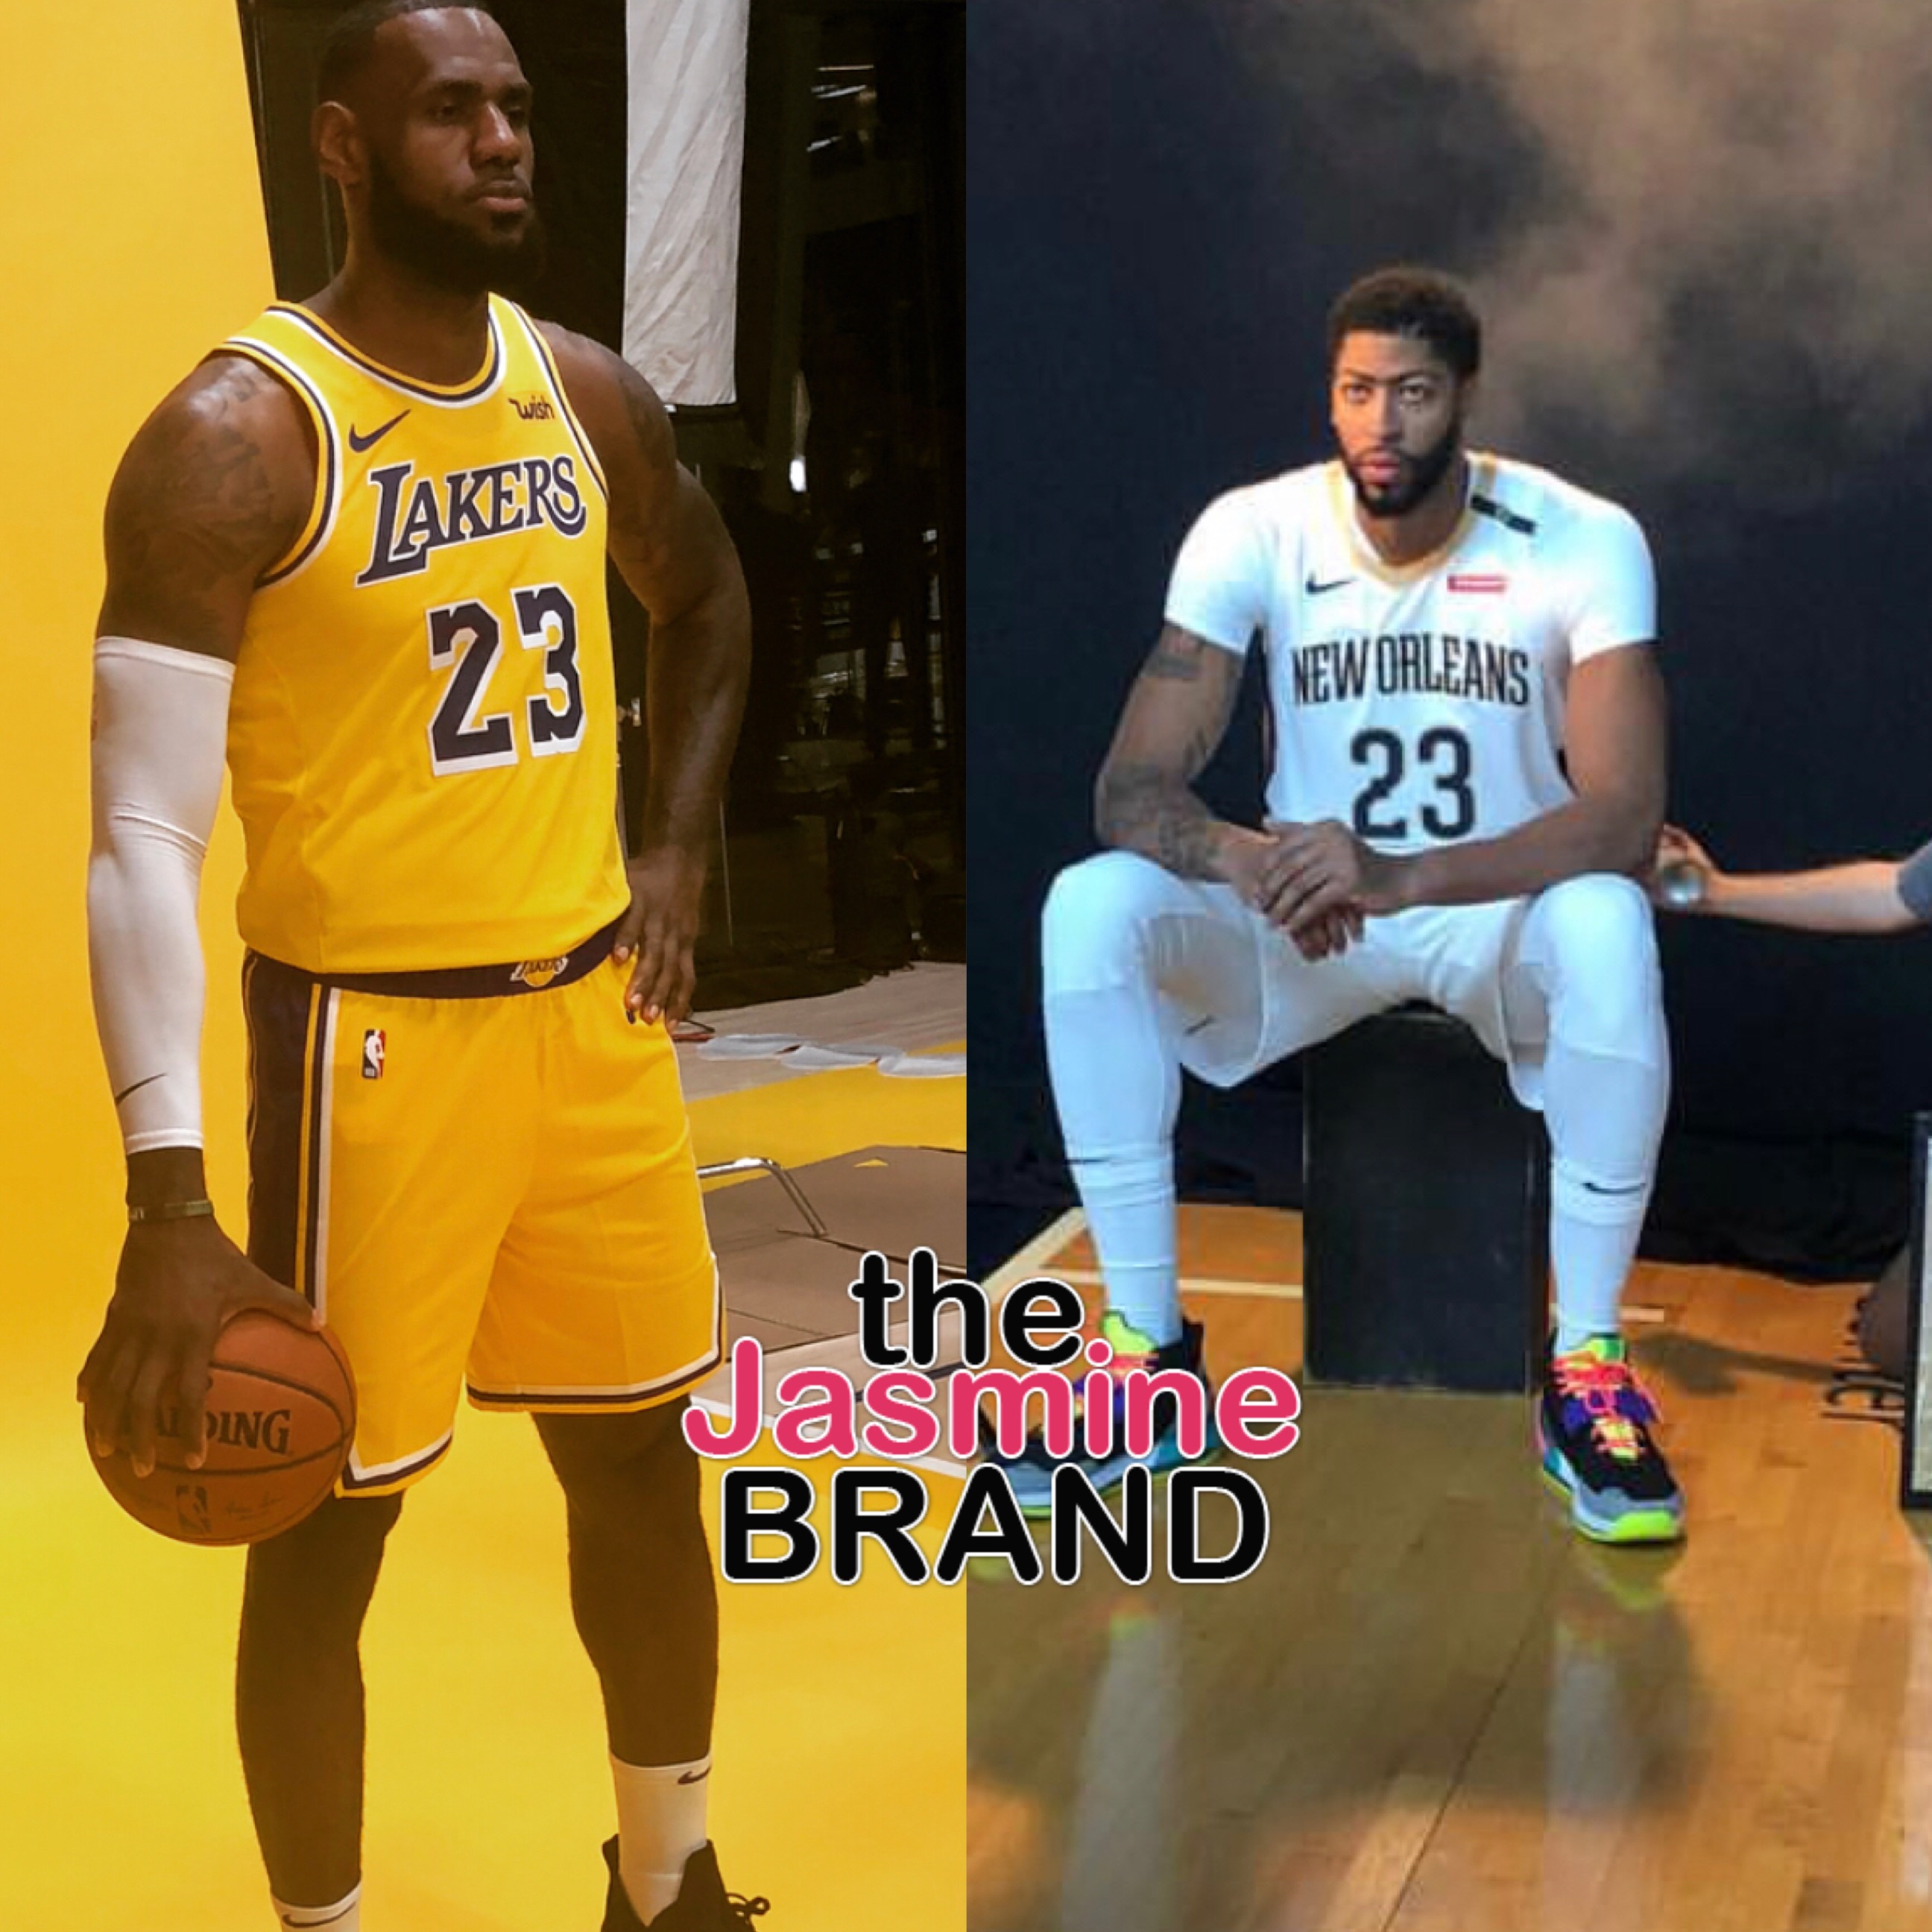 LeBron James gives Anthony Davis the No. 23 jersey number with